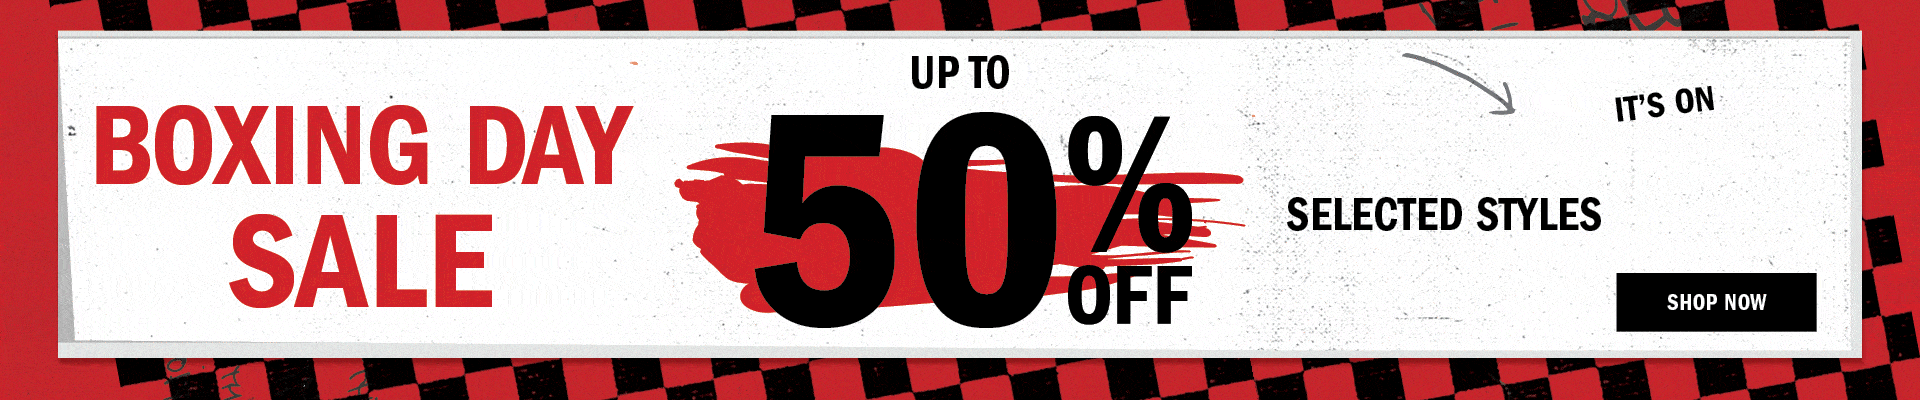 Vans Boxing Day: Up to 50% Off Selected Styles